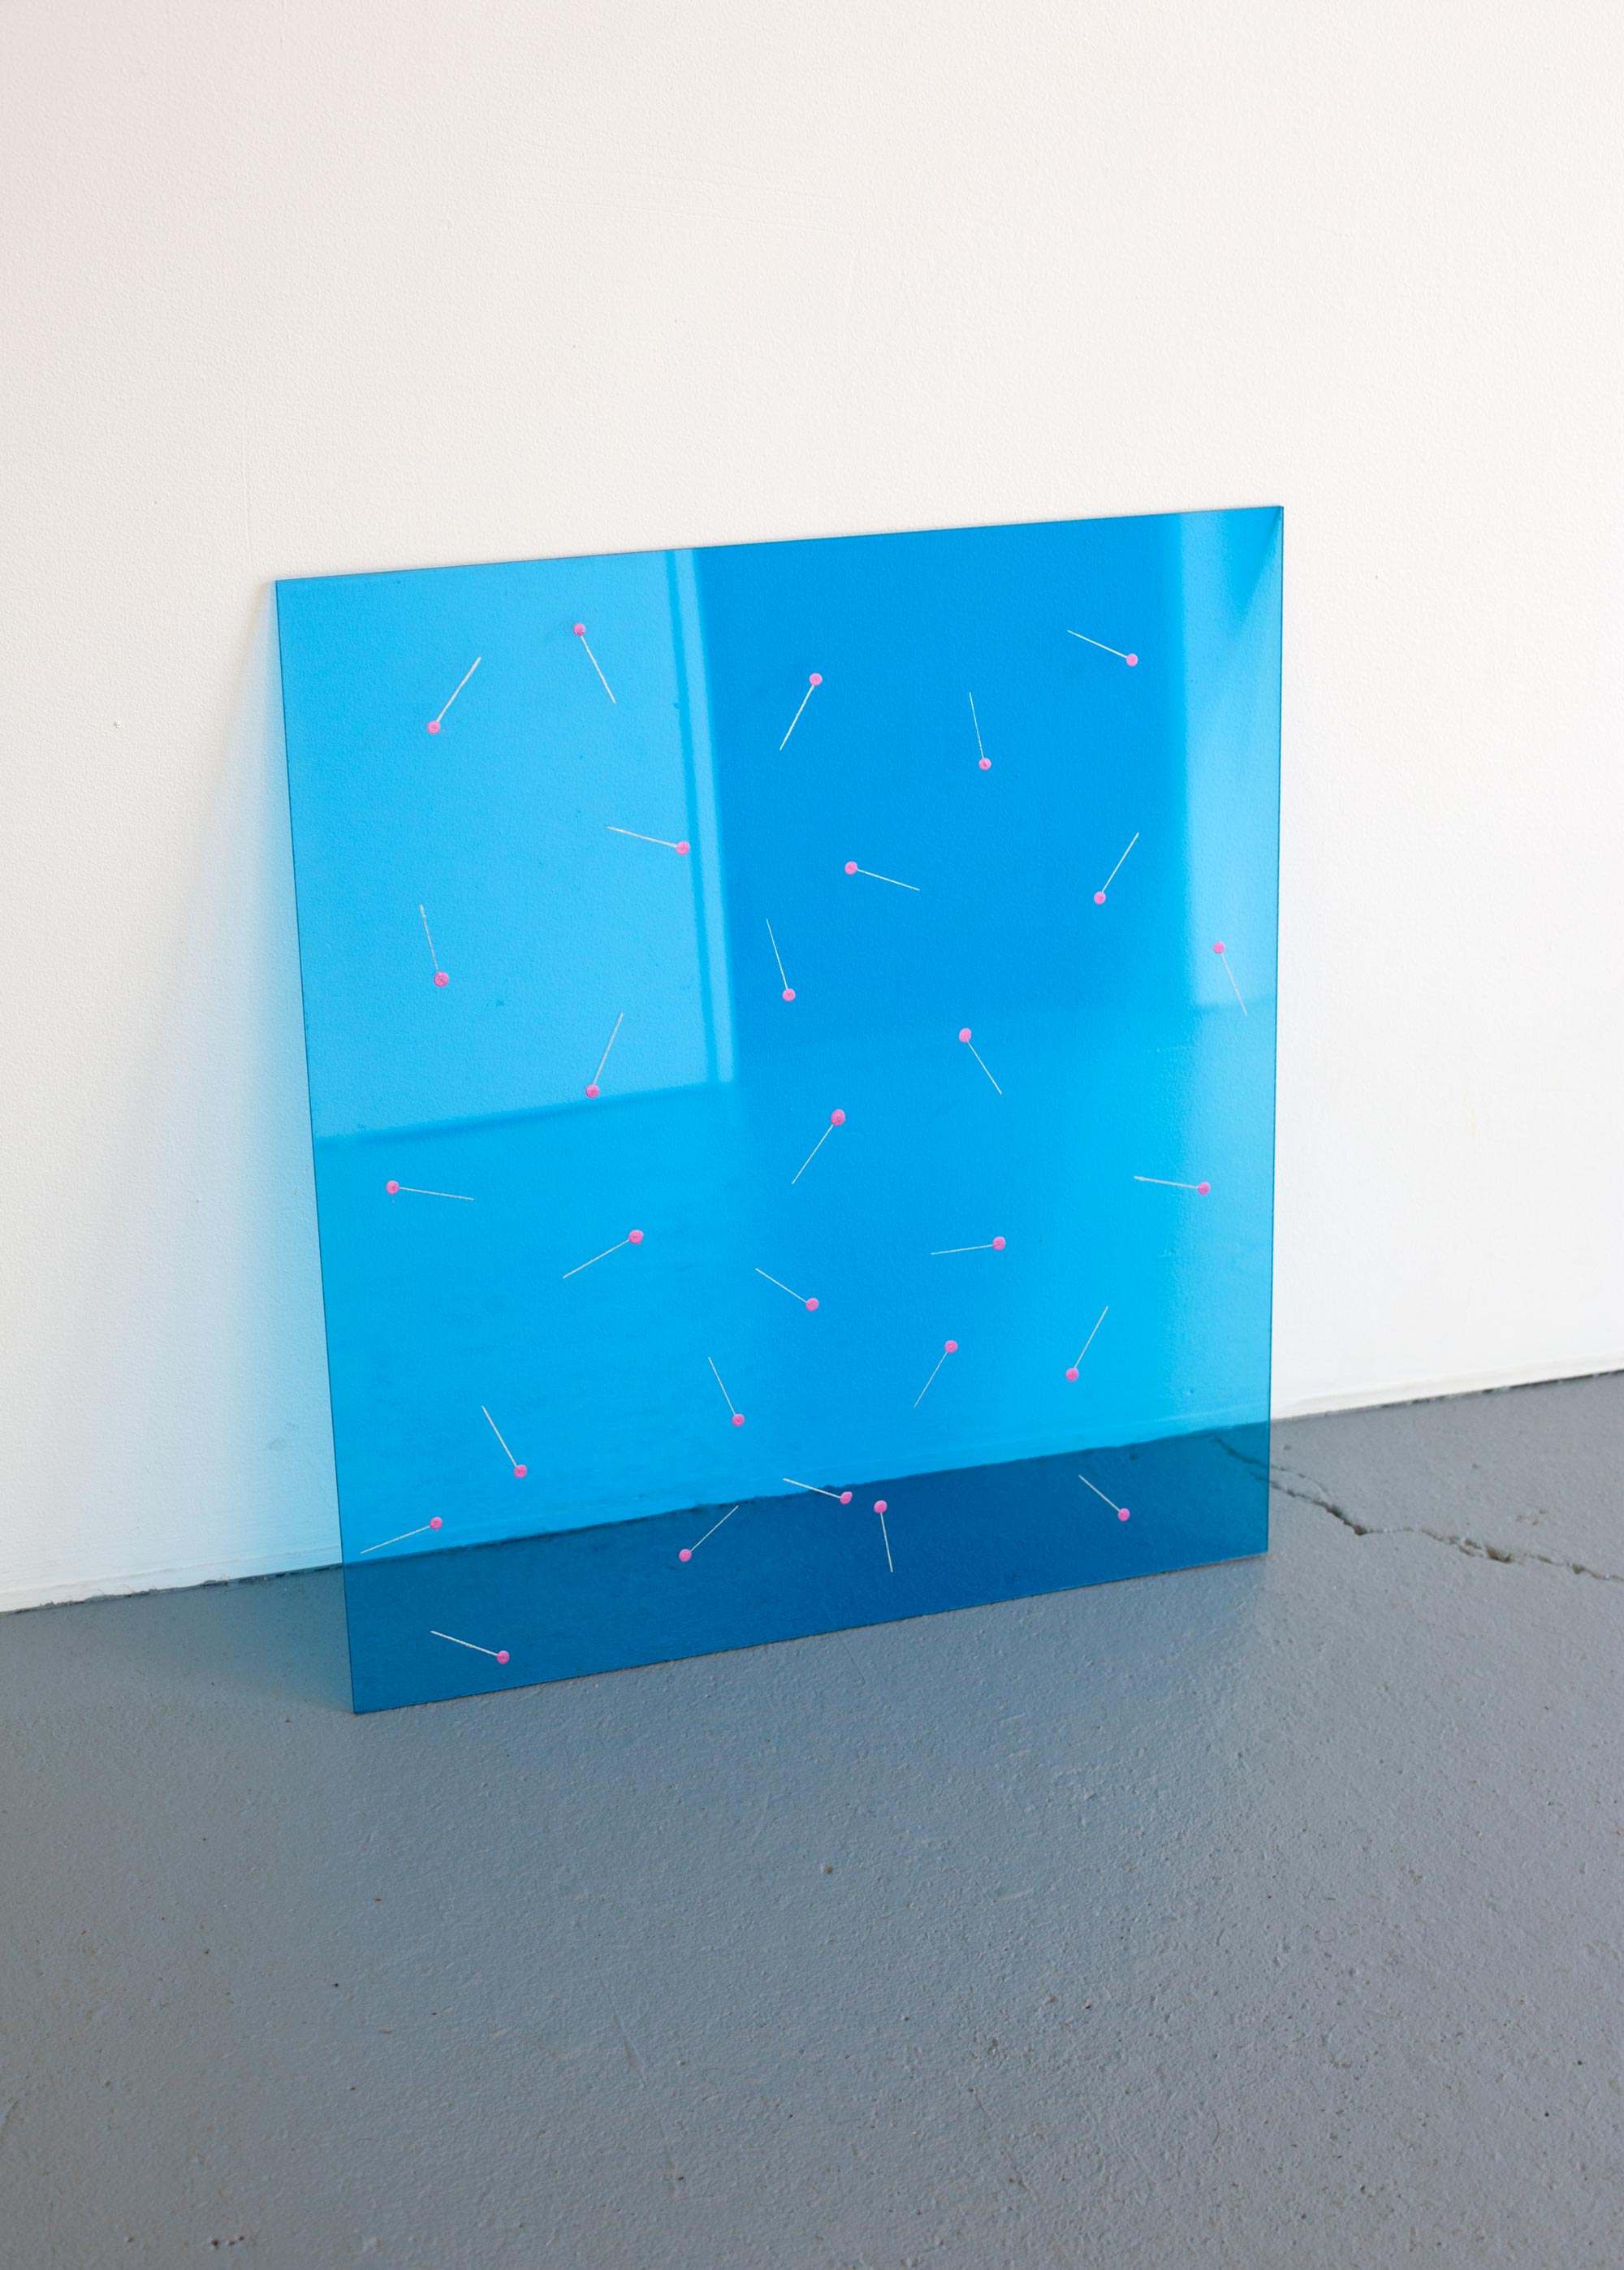   Sewing Room Floor 2 , 2019, acrylic paint and iridescent ink on blue Perspex, 50.5 x 45cm  Photo: Xavier Burrow 